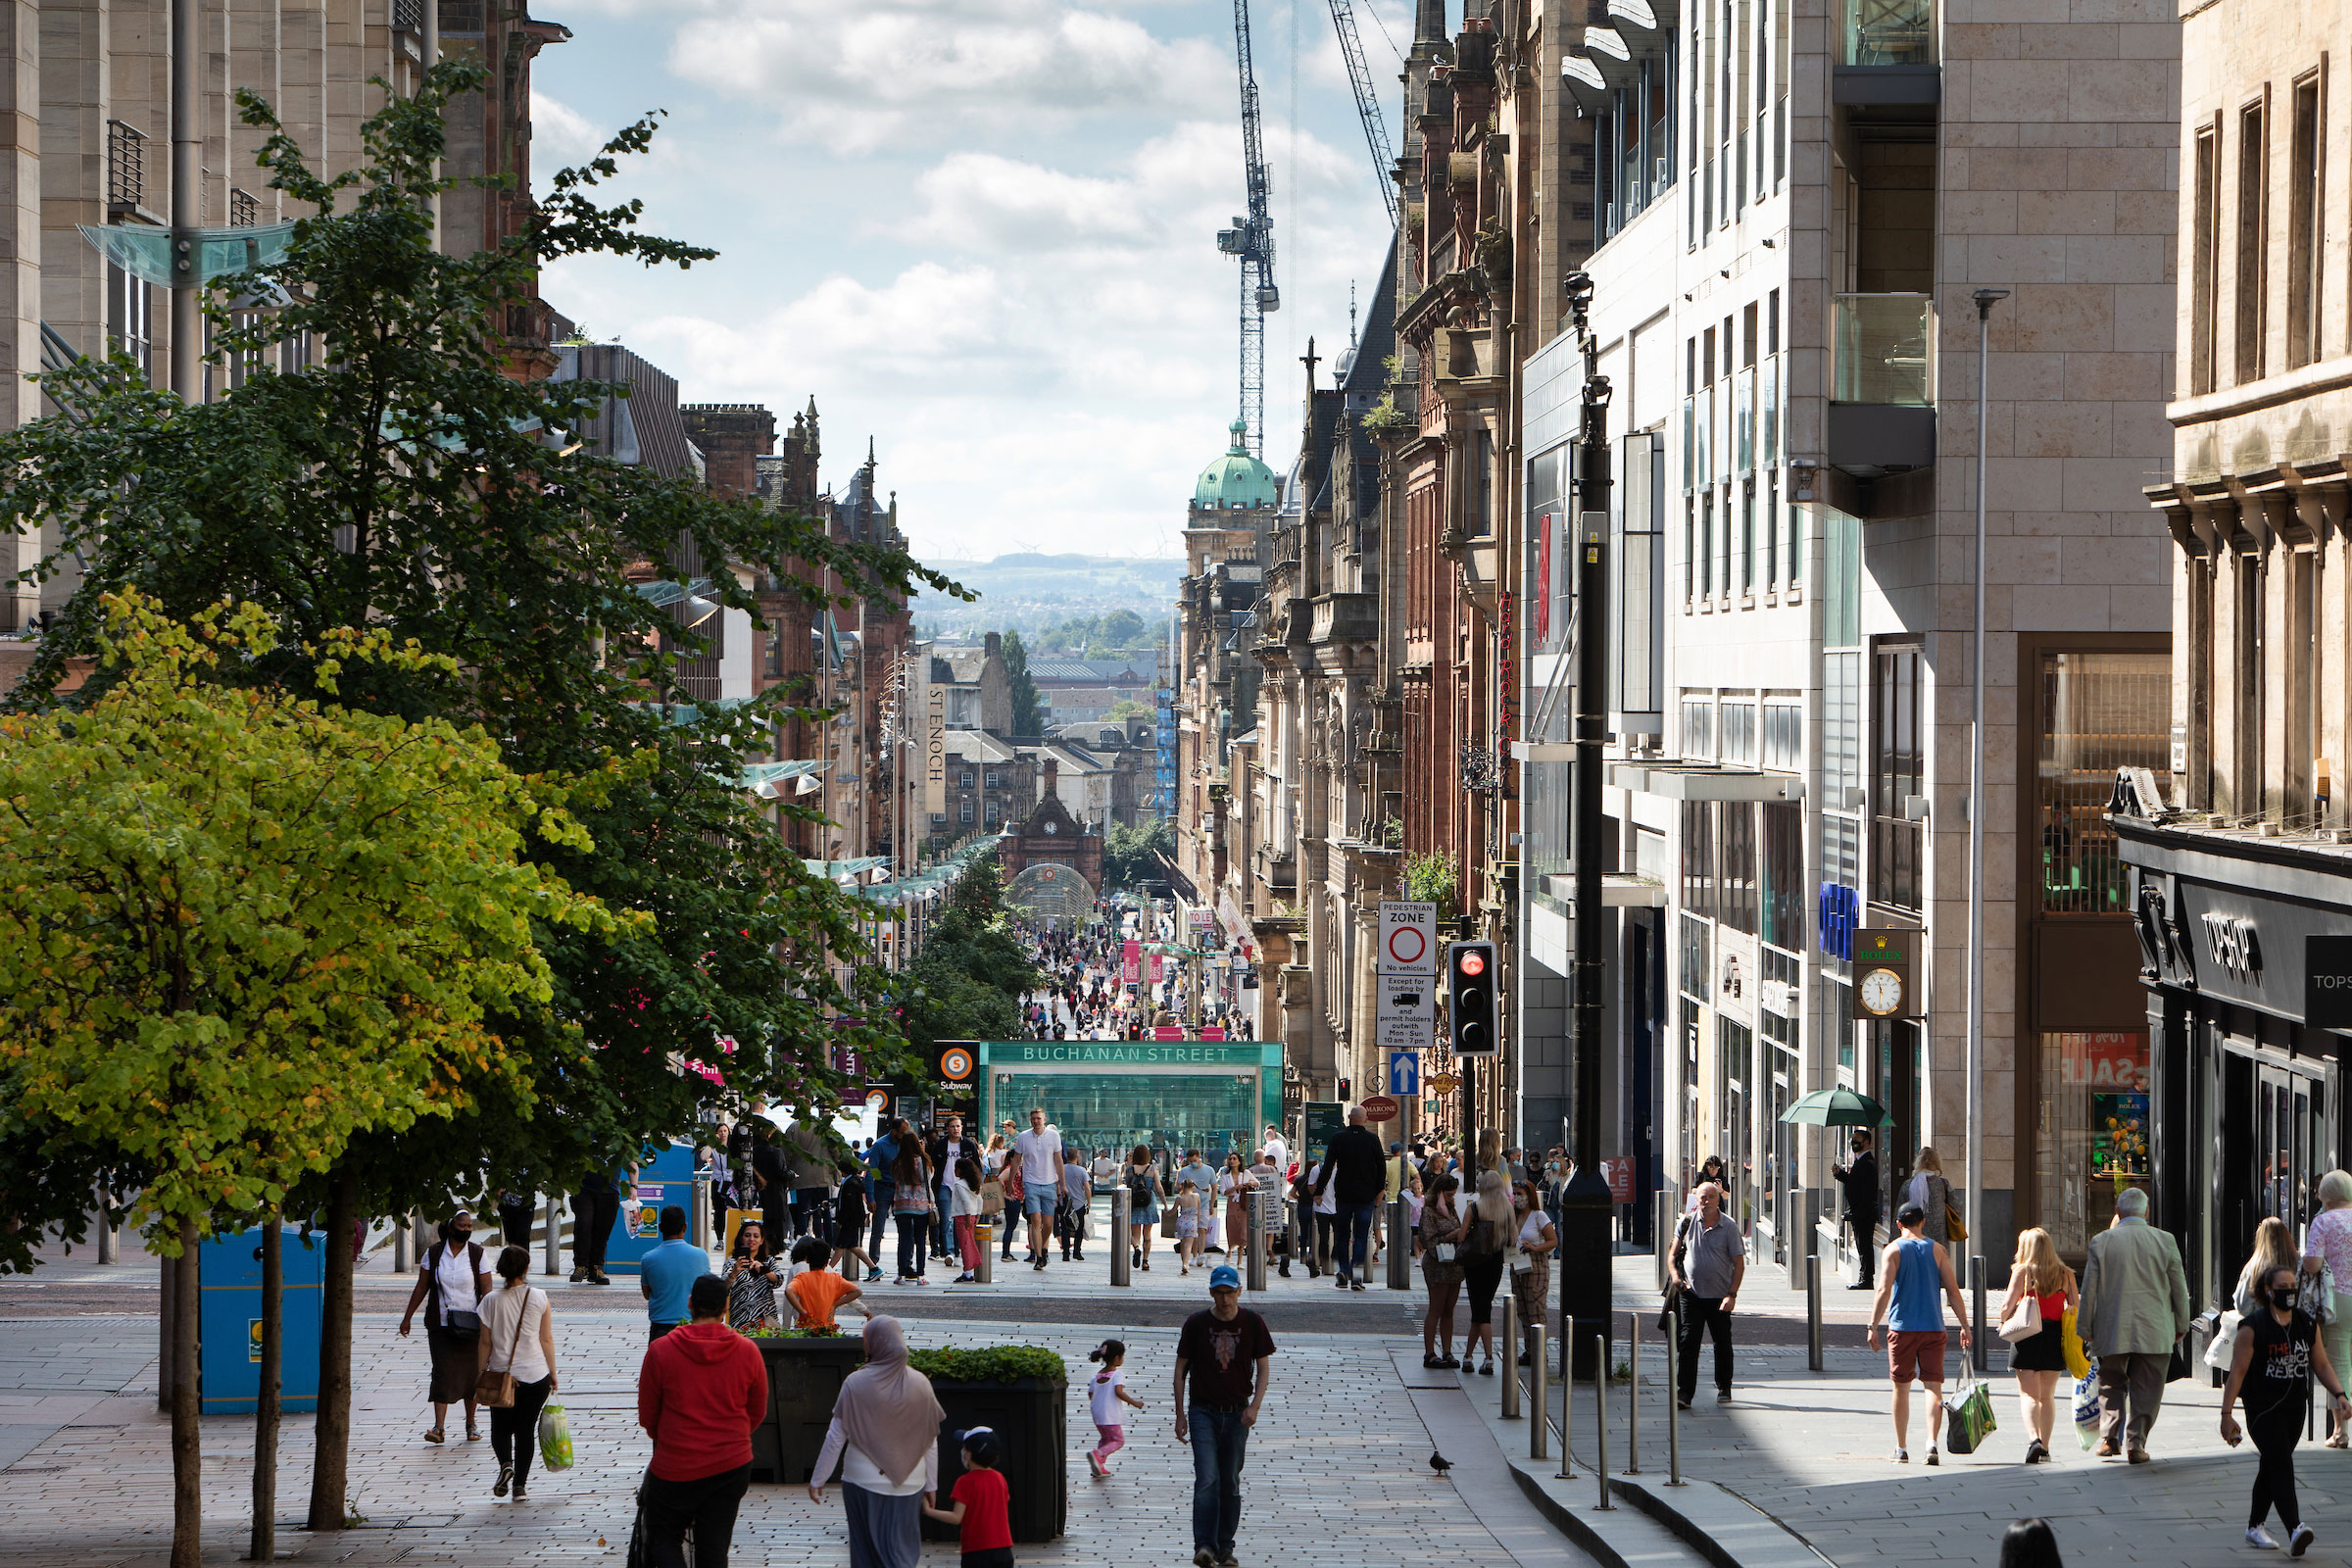 Looking down Buchanan Street, Glasgow towards St Enoch Square and the River Clyde